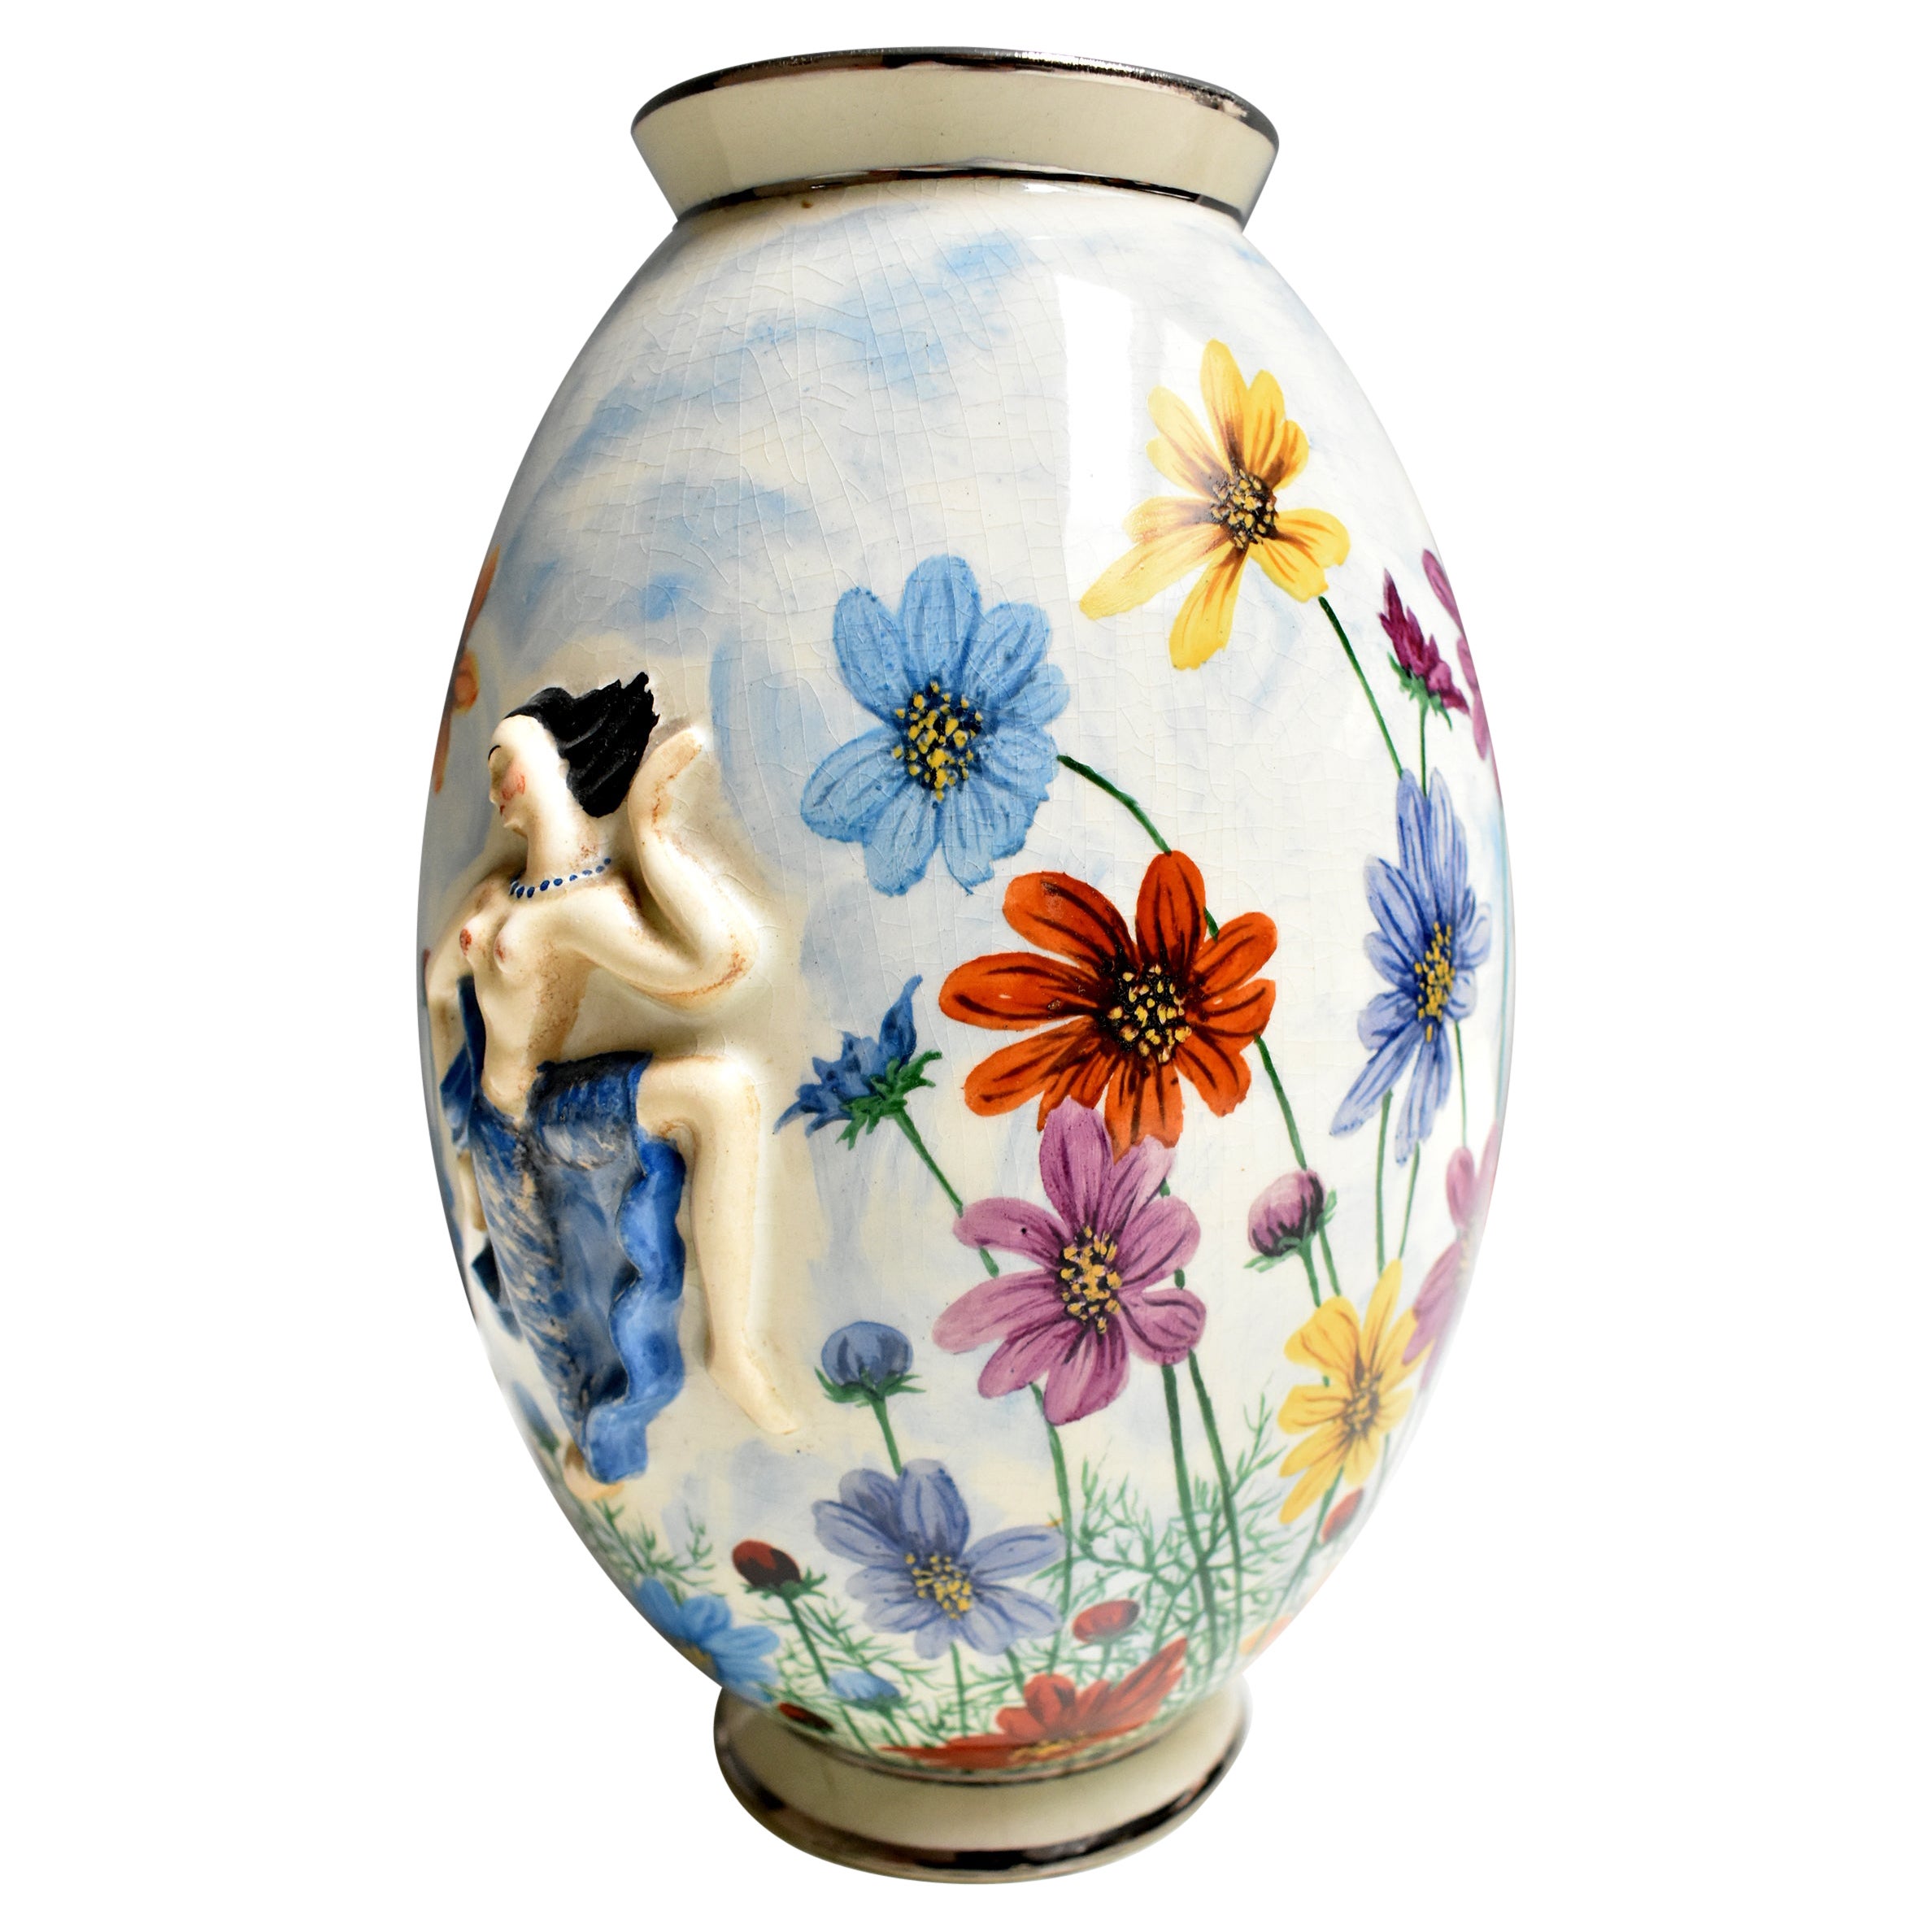 1950, Vintage White Ceramic Vase, with Signed Floral Painting on the Bottom